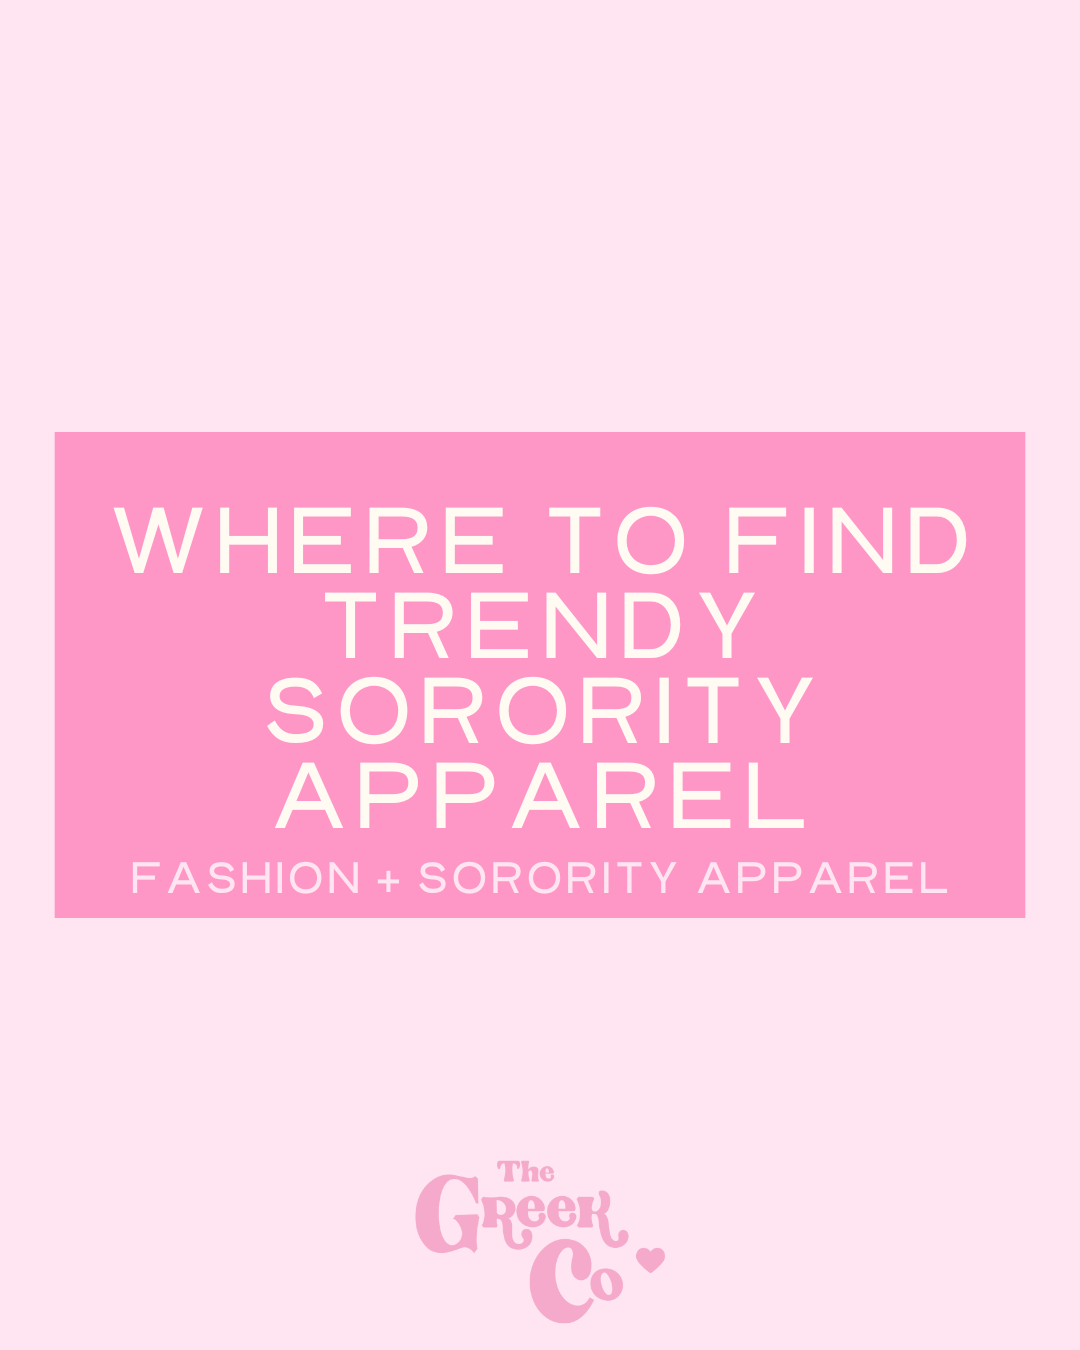 Where to Find Trendy Sorority Apparel: A Guide from The Greek Co